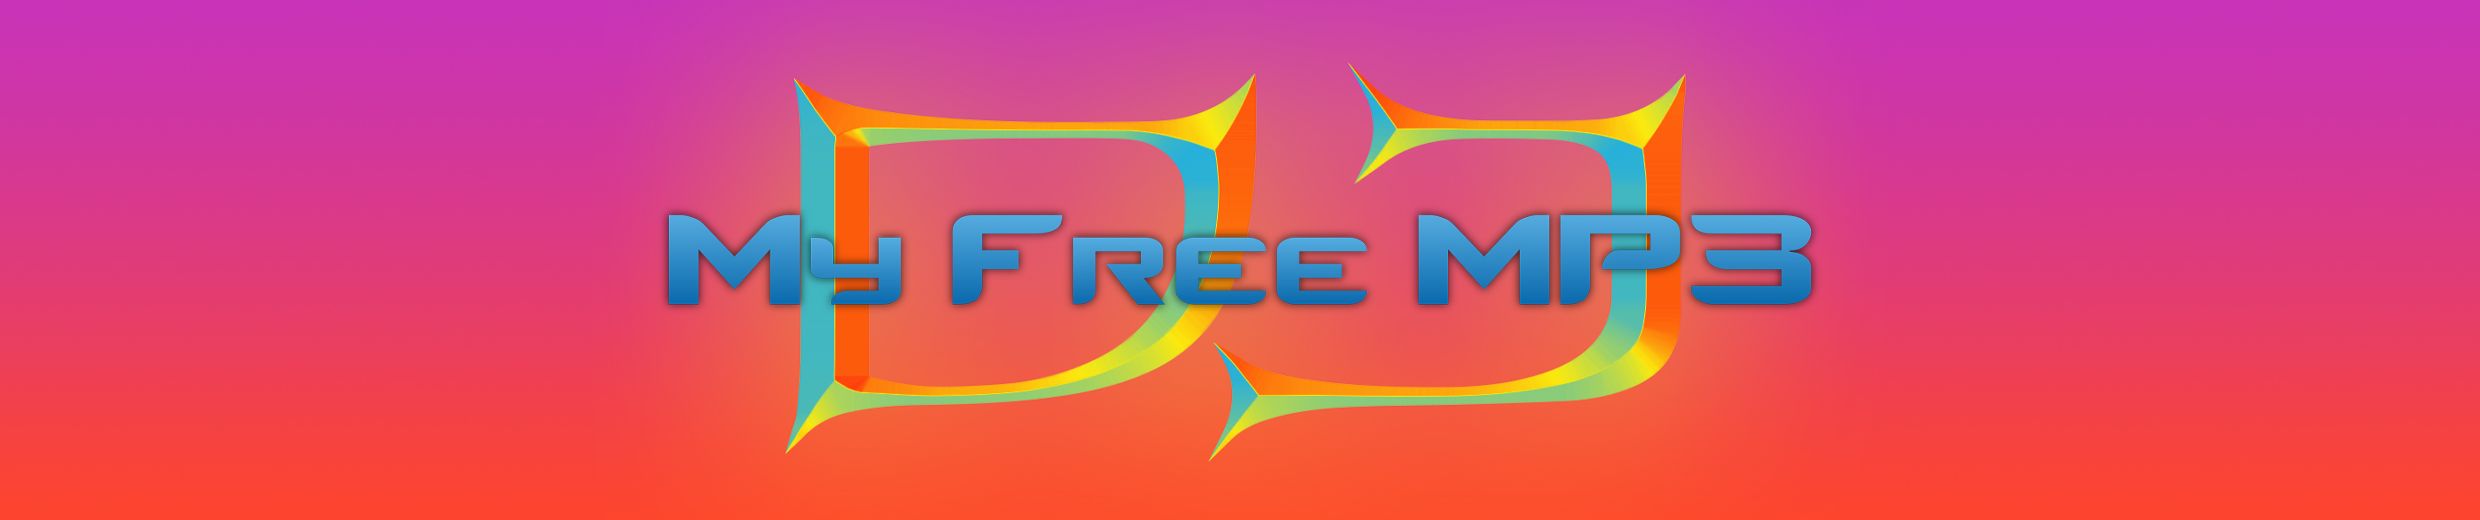 Stream DJ Myfreemp3.net music | Listen to songs, albums, playlists for free  on SoundCloud